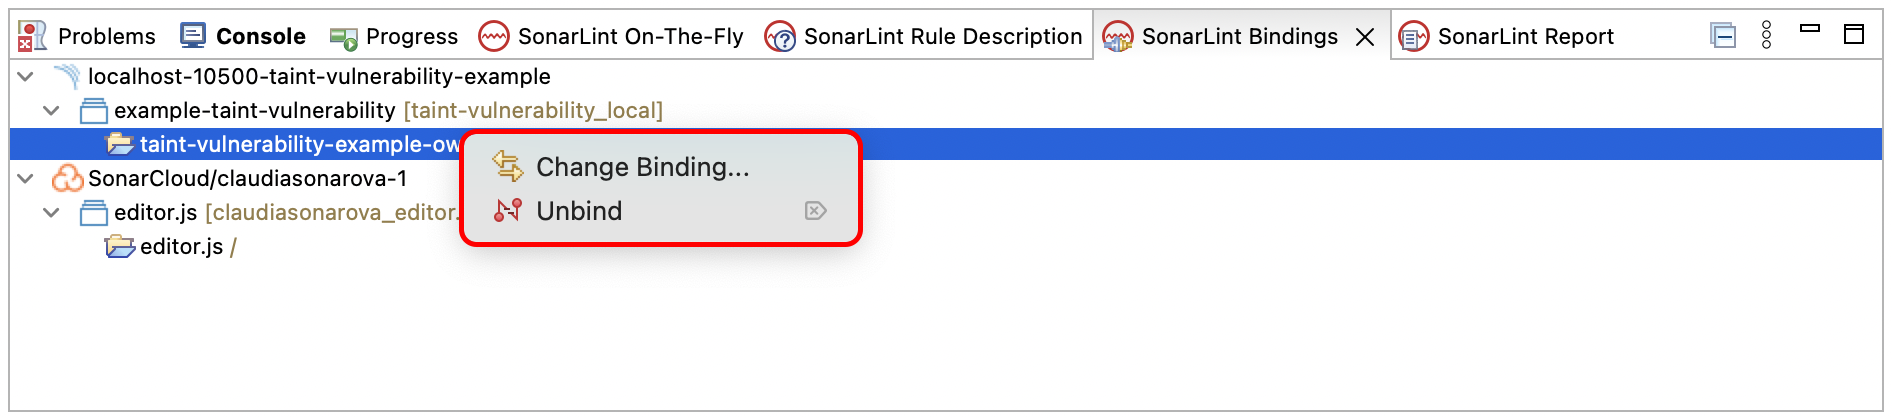 You can view and manage your connections and bindings in the SonarLint Bindings view.